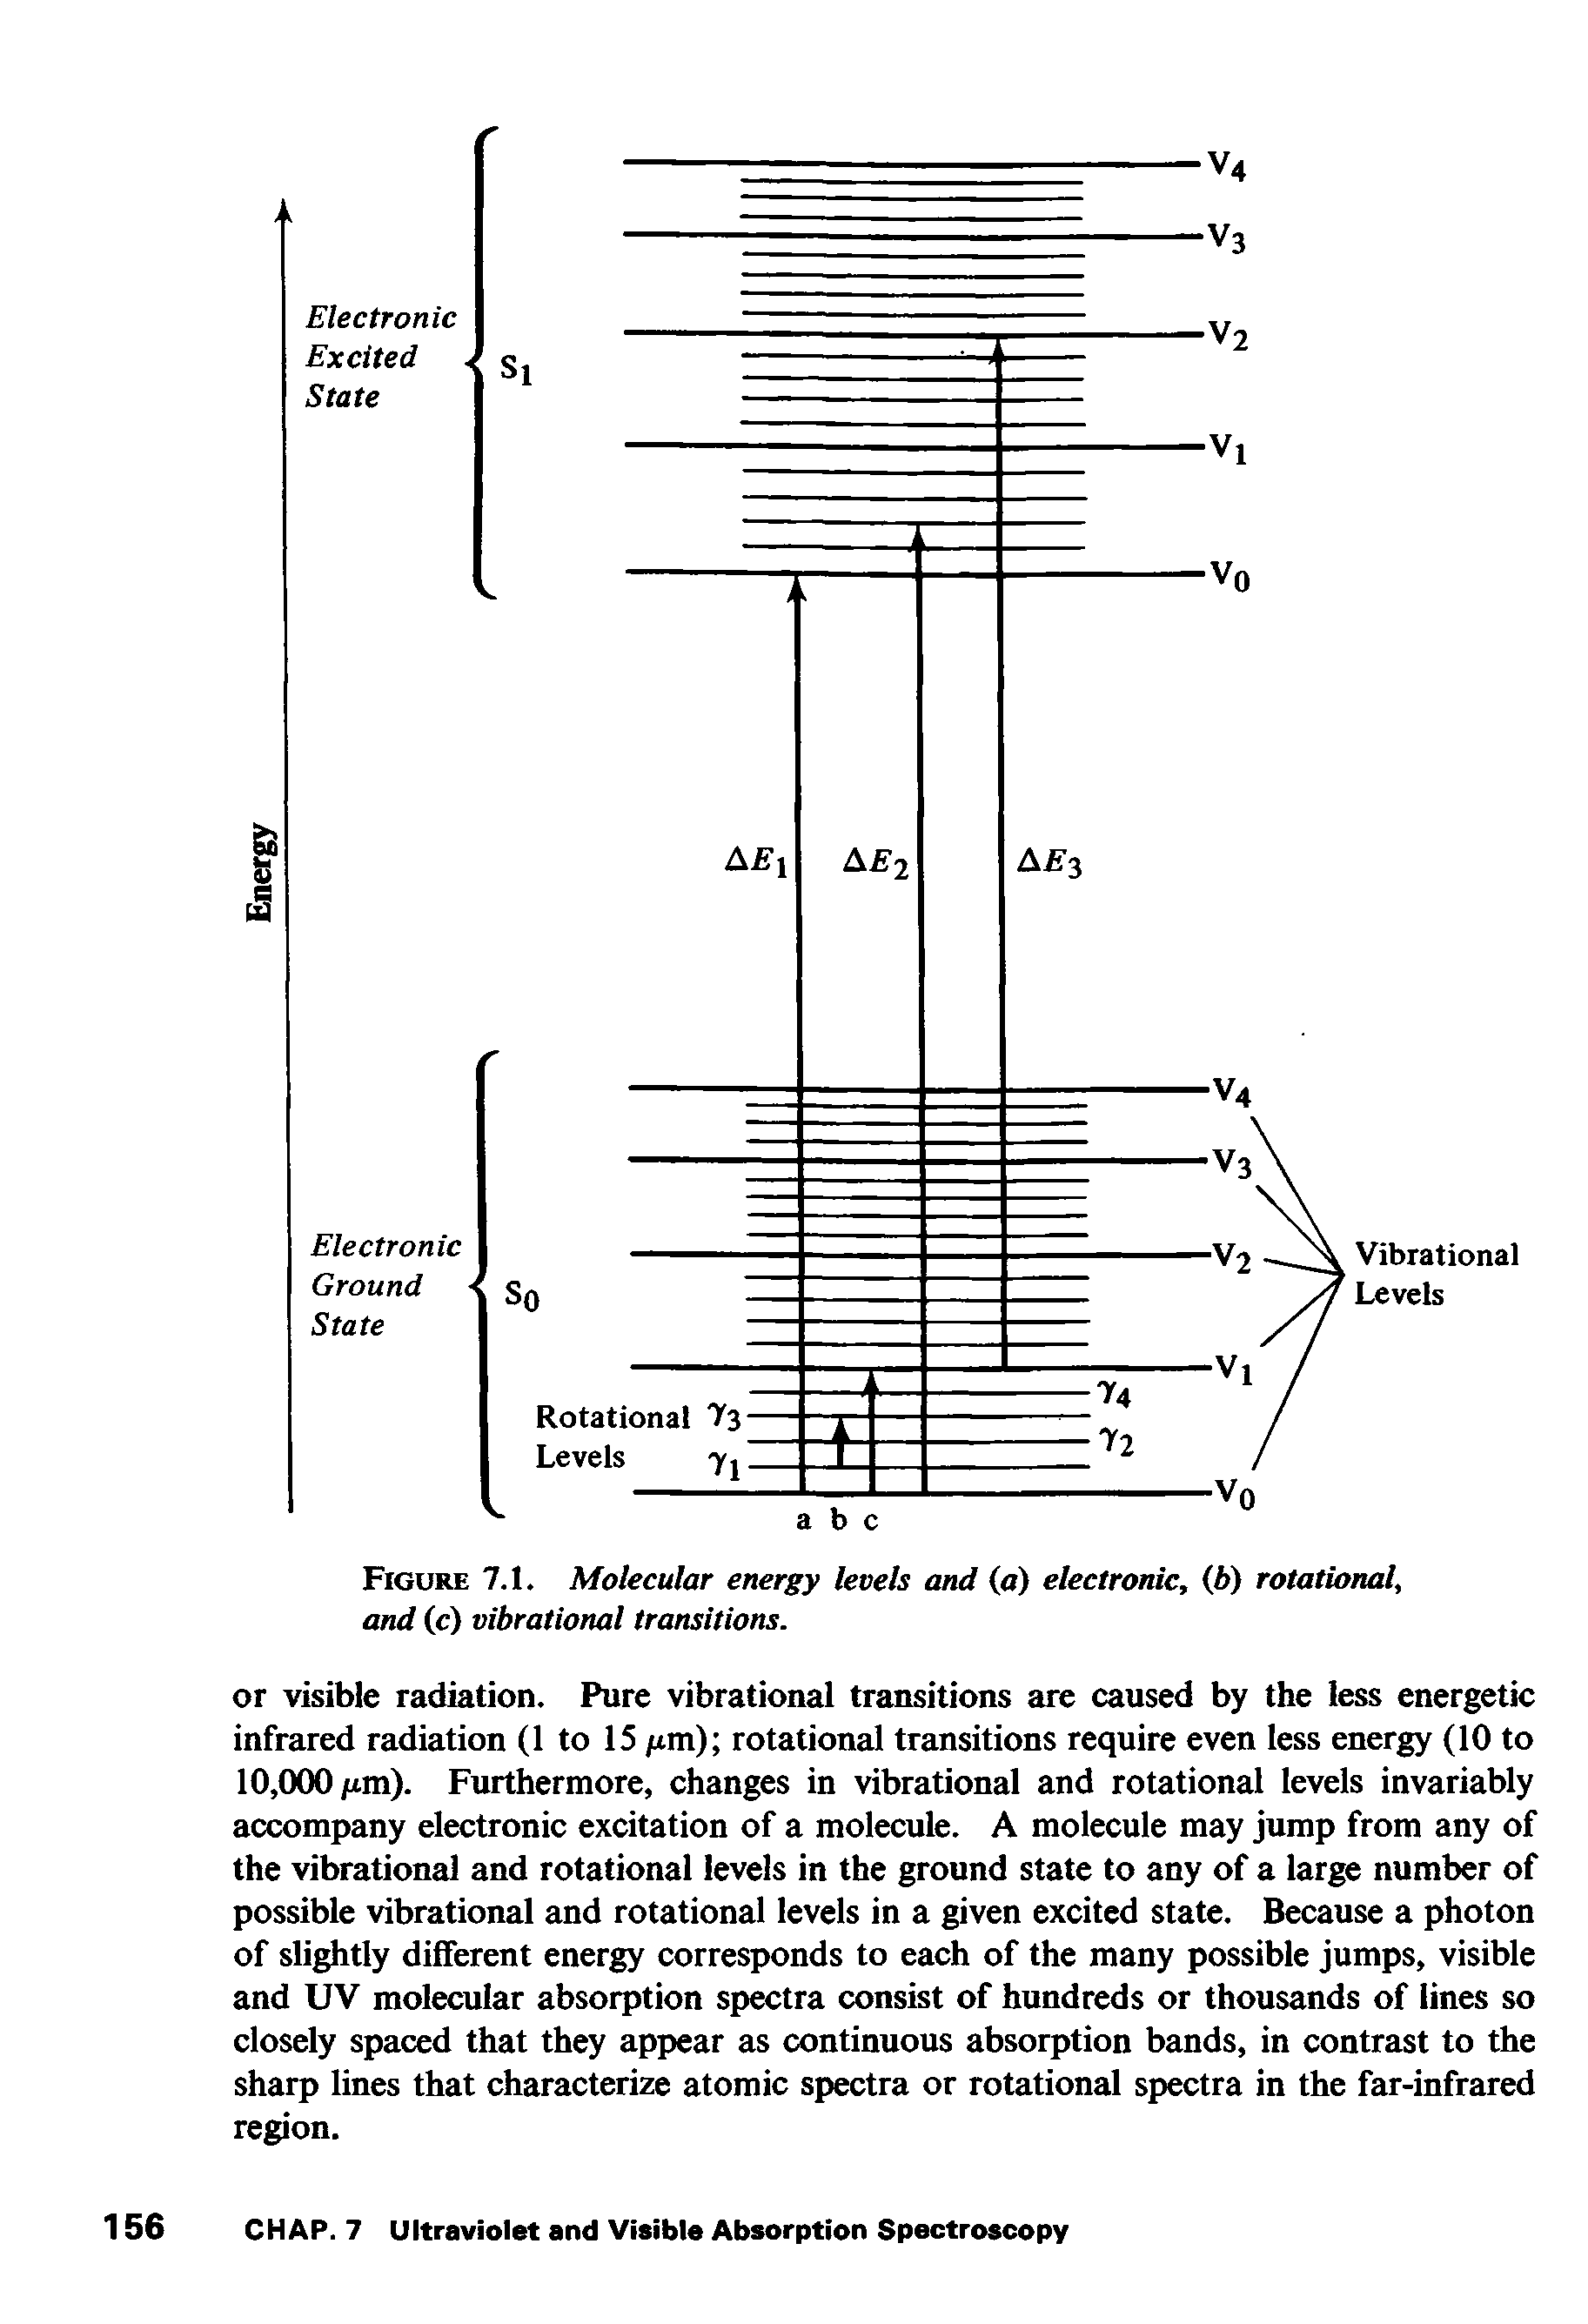 Figure 7.1. Molecular energy levels and (a) electronic, (b) rotational, and (c) vibrational transitions.